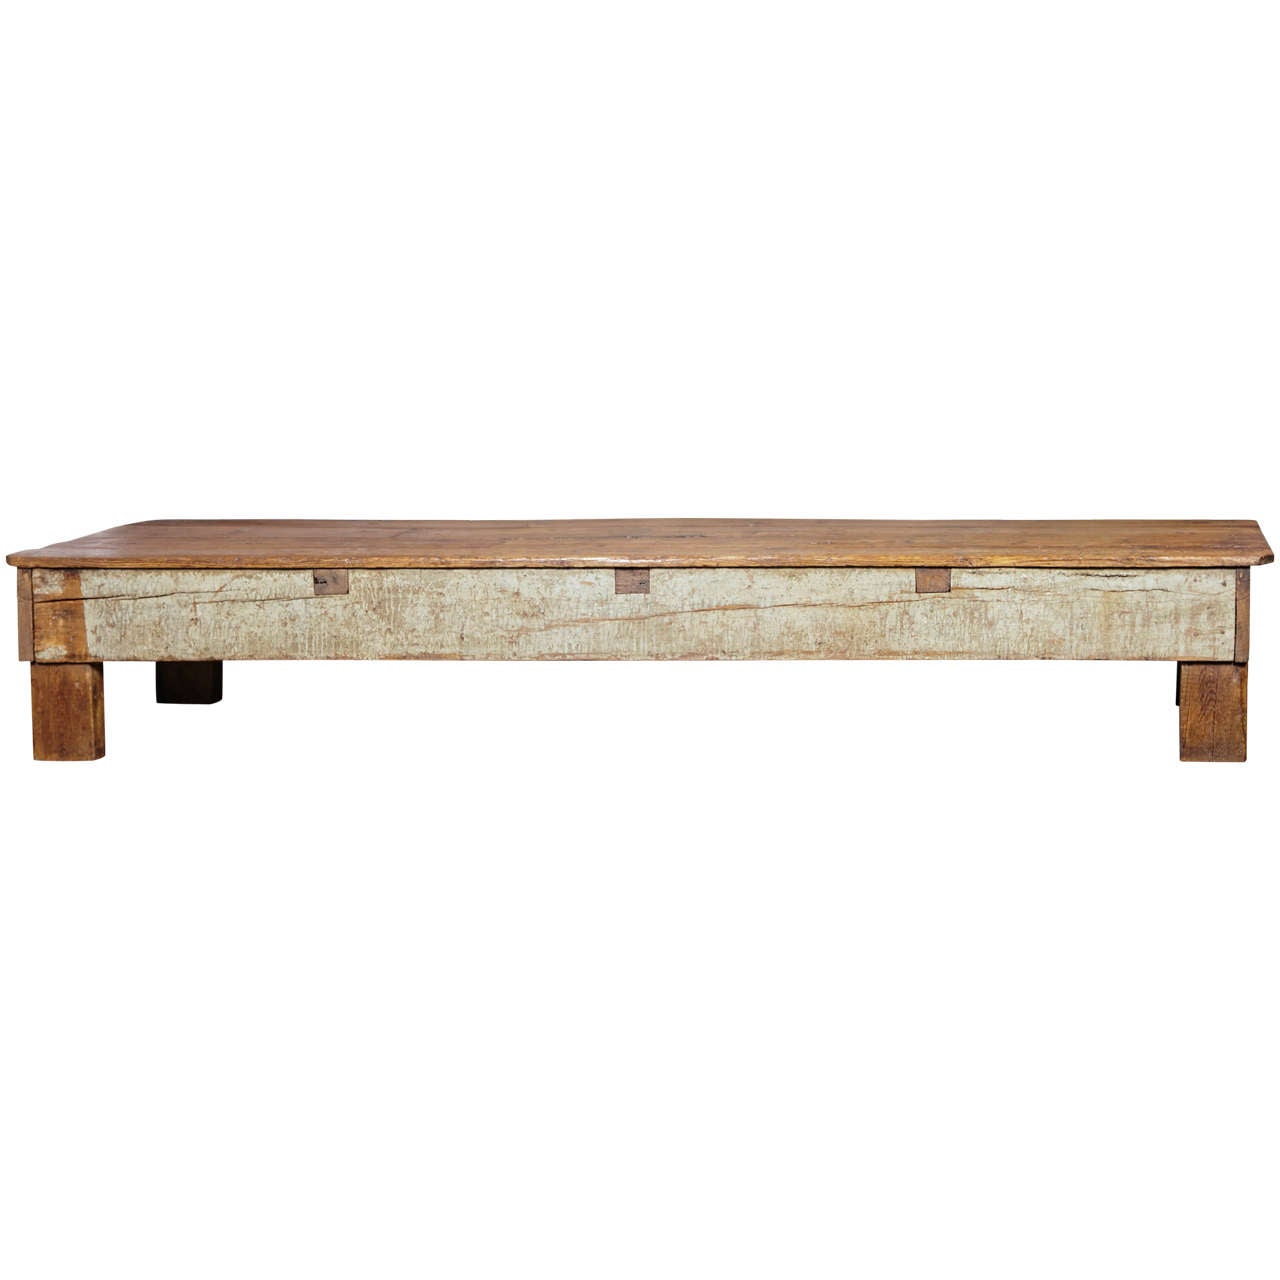 French Shop Pine Bench Used for Long Coffee Table or Low Side Table